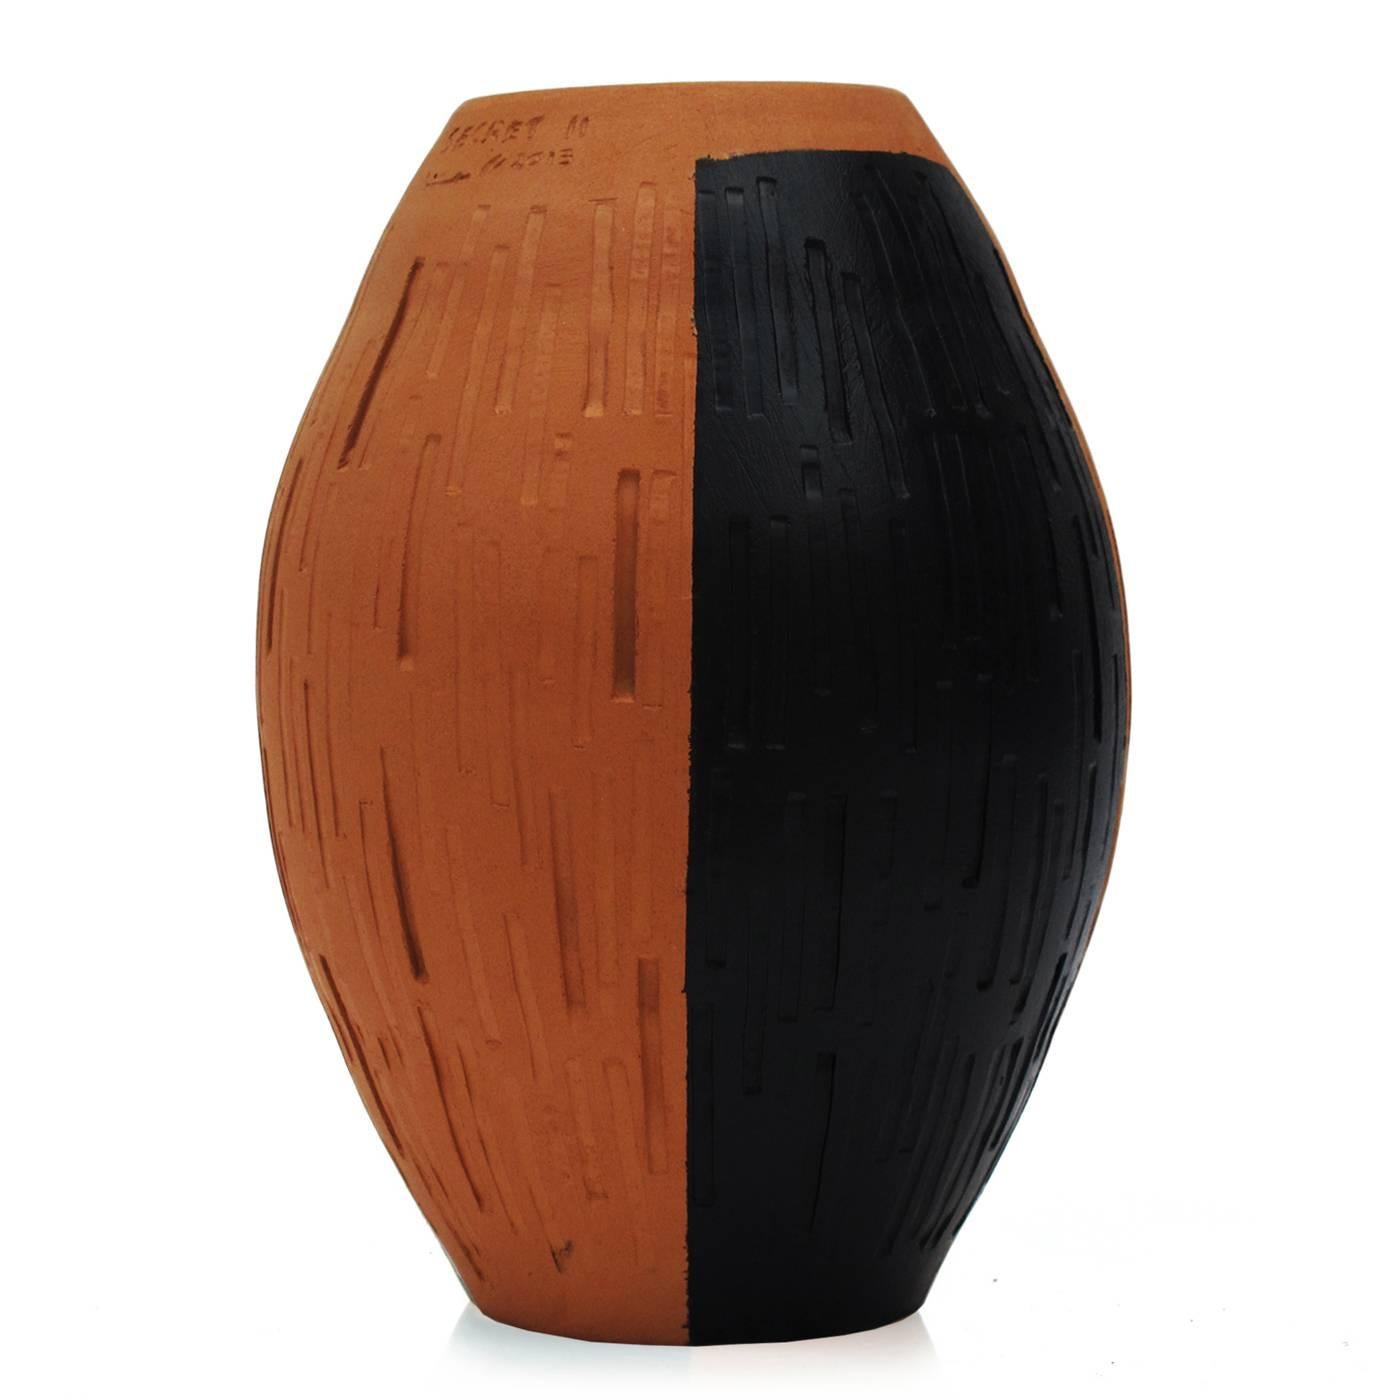 This exquisite vase is part of the Secret collection. Its oval shape is gentle and elegant, while the striking black and orange color combination gives the piece a modern allure, as does the unique texture that digs straight and round grooves onto